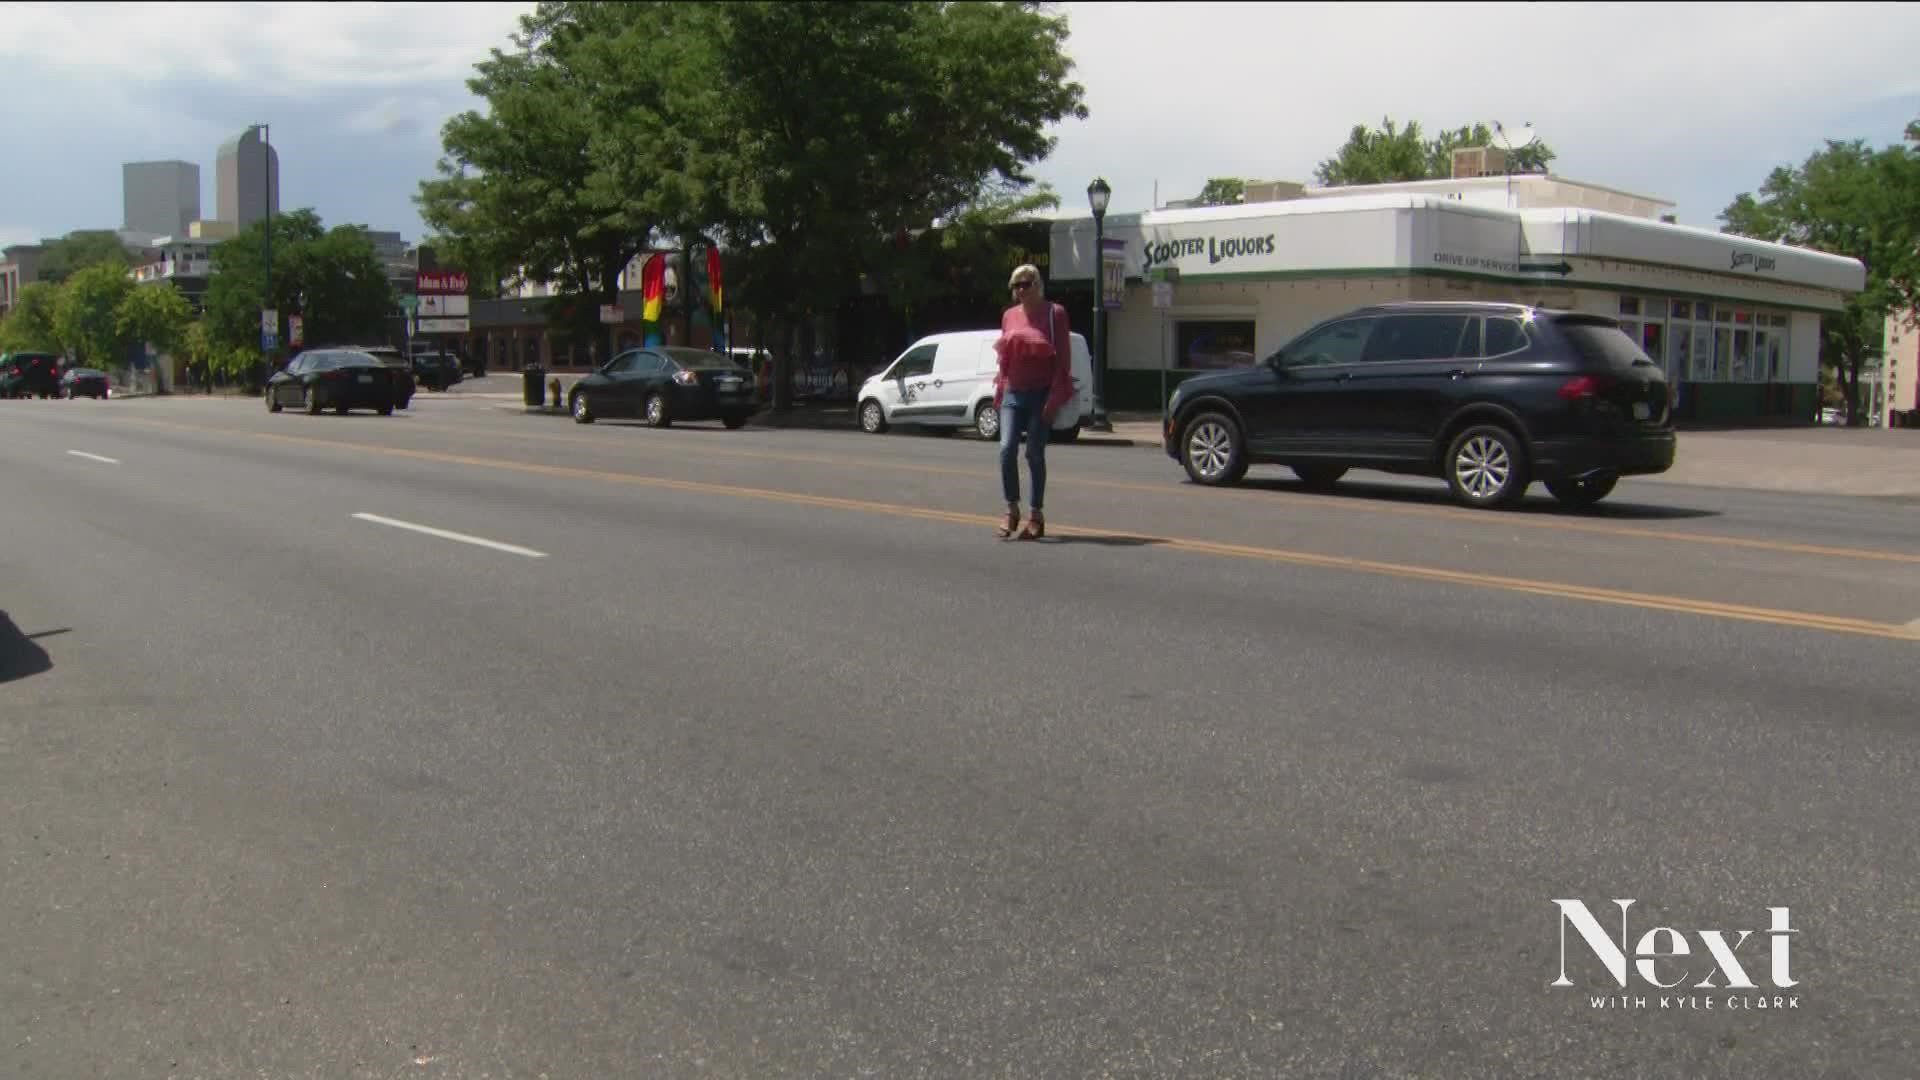 Pedestrian advocate groups say Denver's laws aren't in line with the rest of the state, and that the ticketing process targets some people more than others.